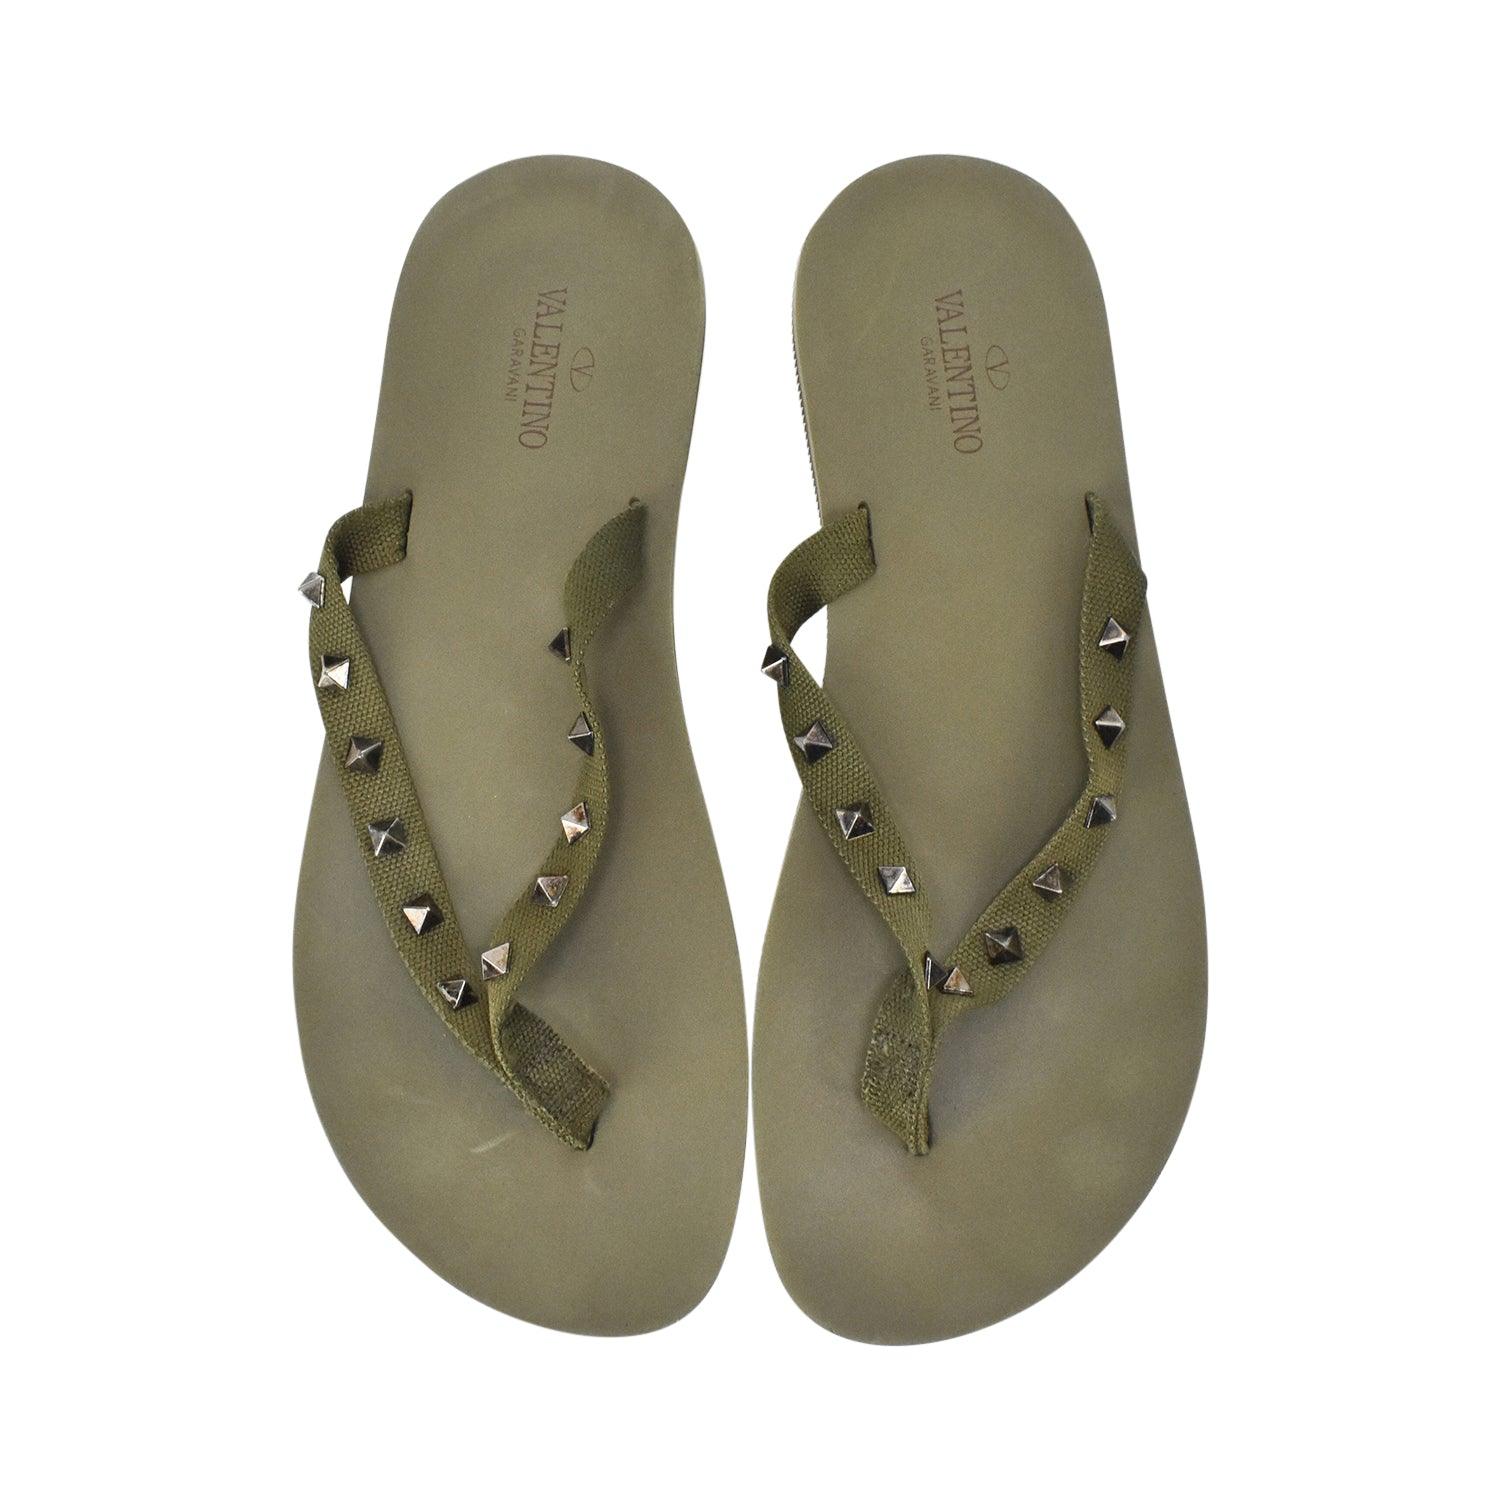 Valentino Sandals - Men's 8.5 - Fashionably Yours